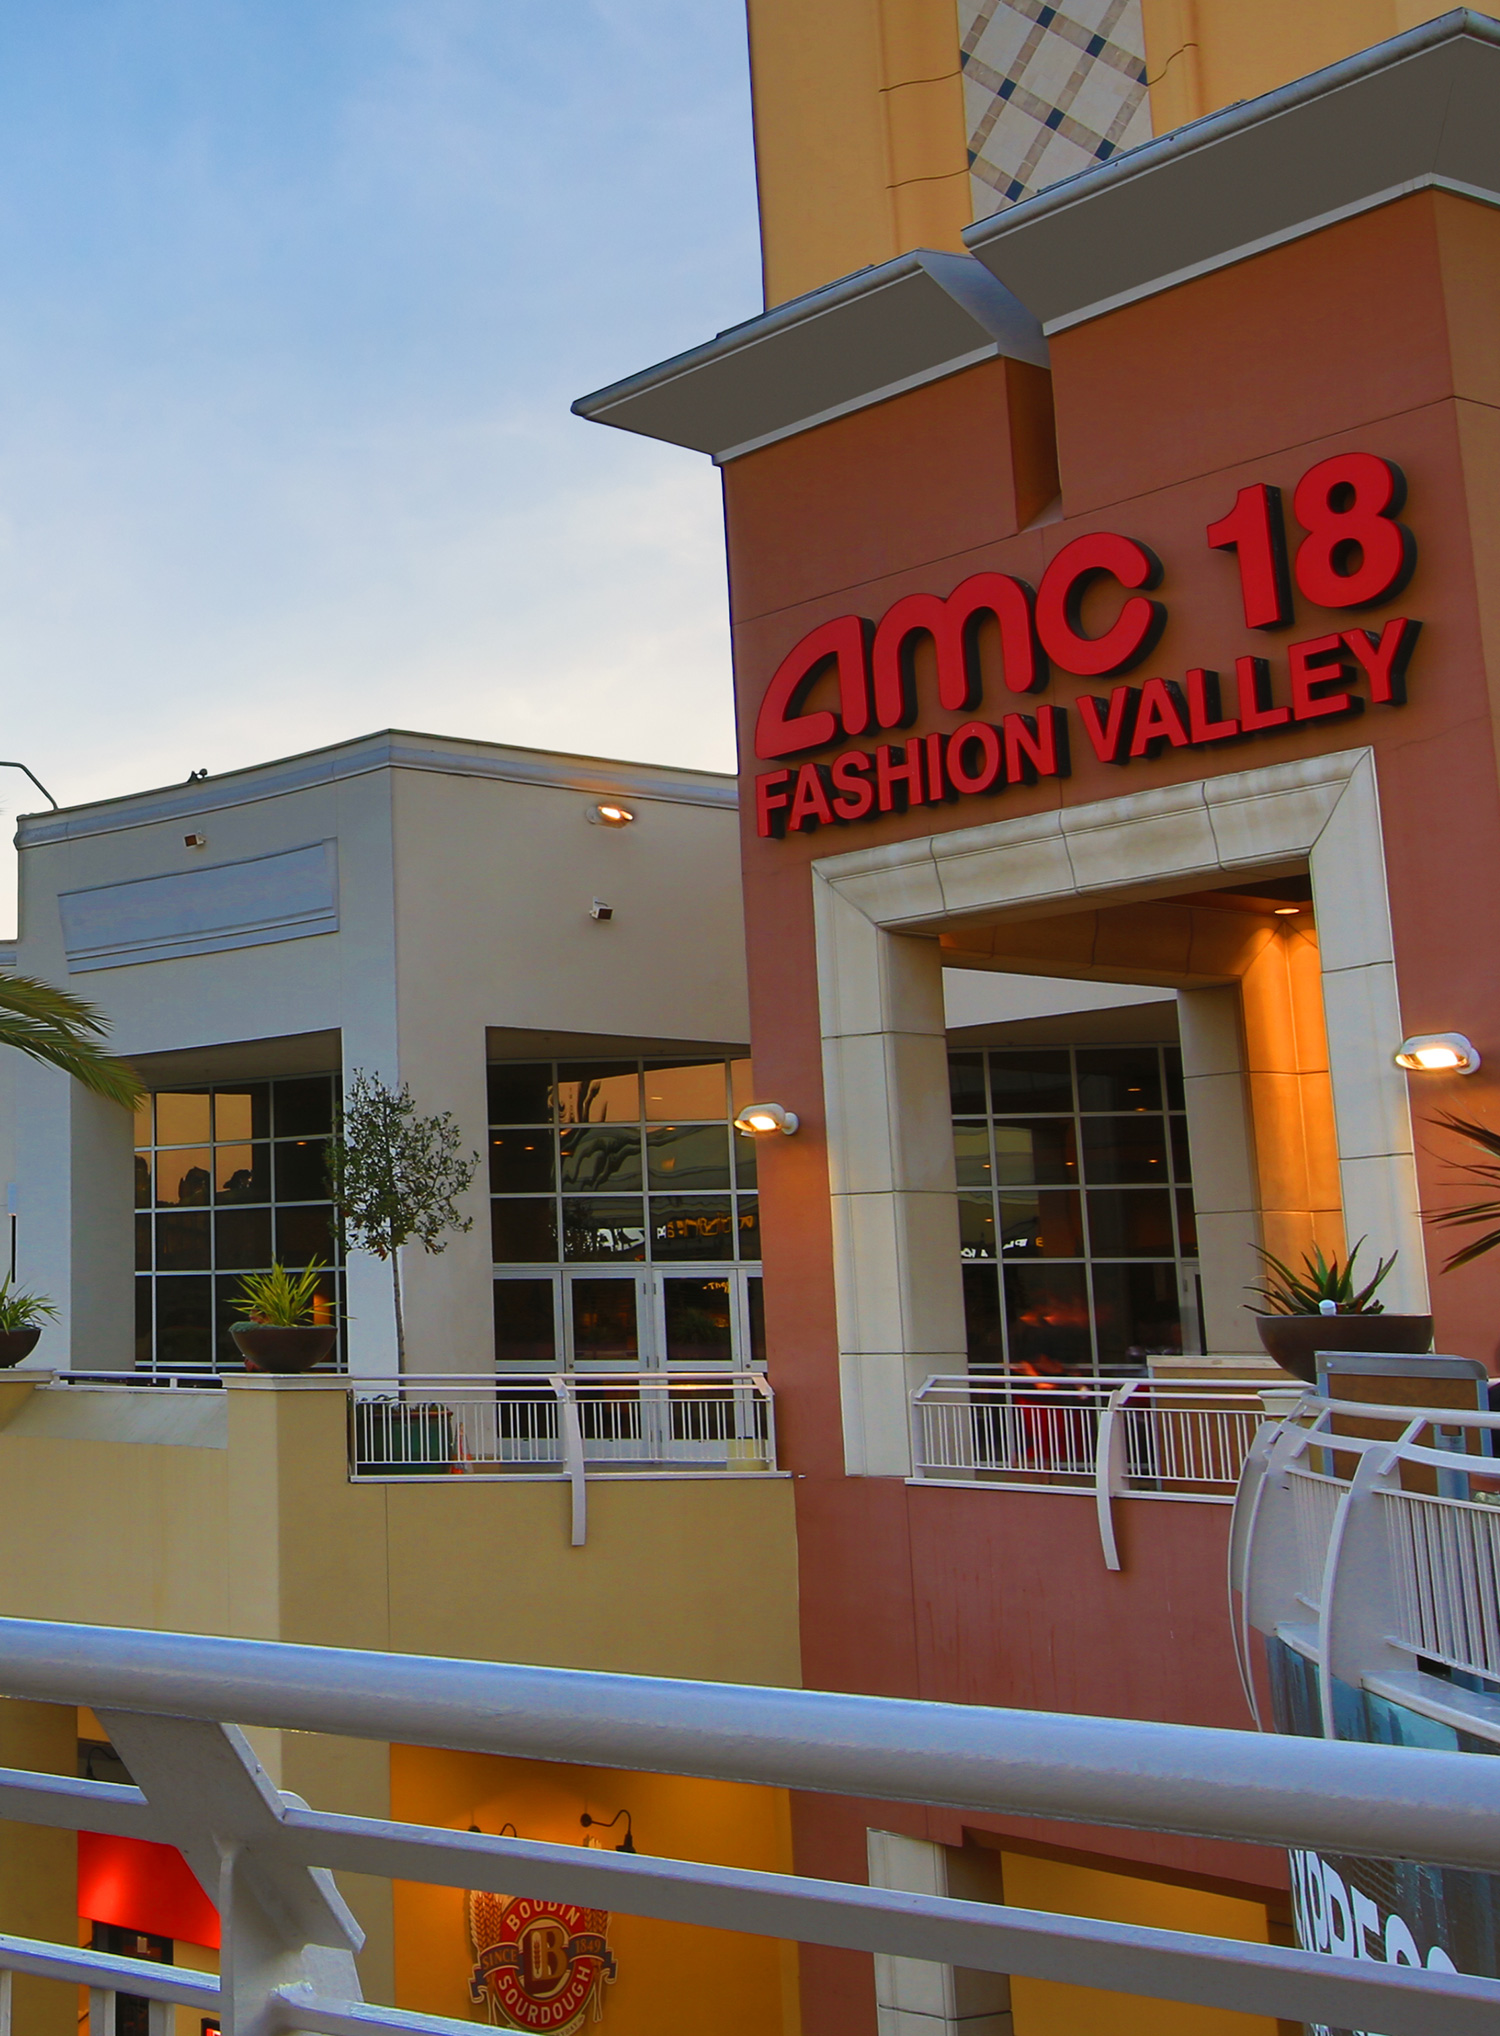 Welcome To Fashion Valley - A Shopping Center In San Diego, CA - A